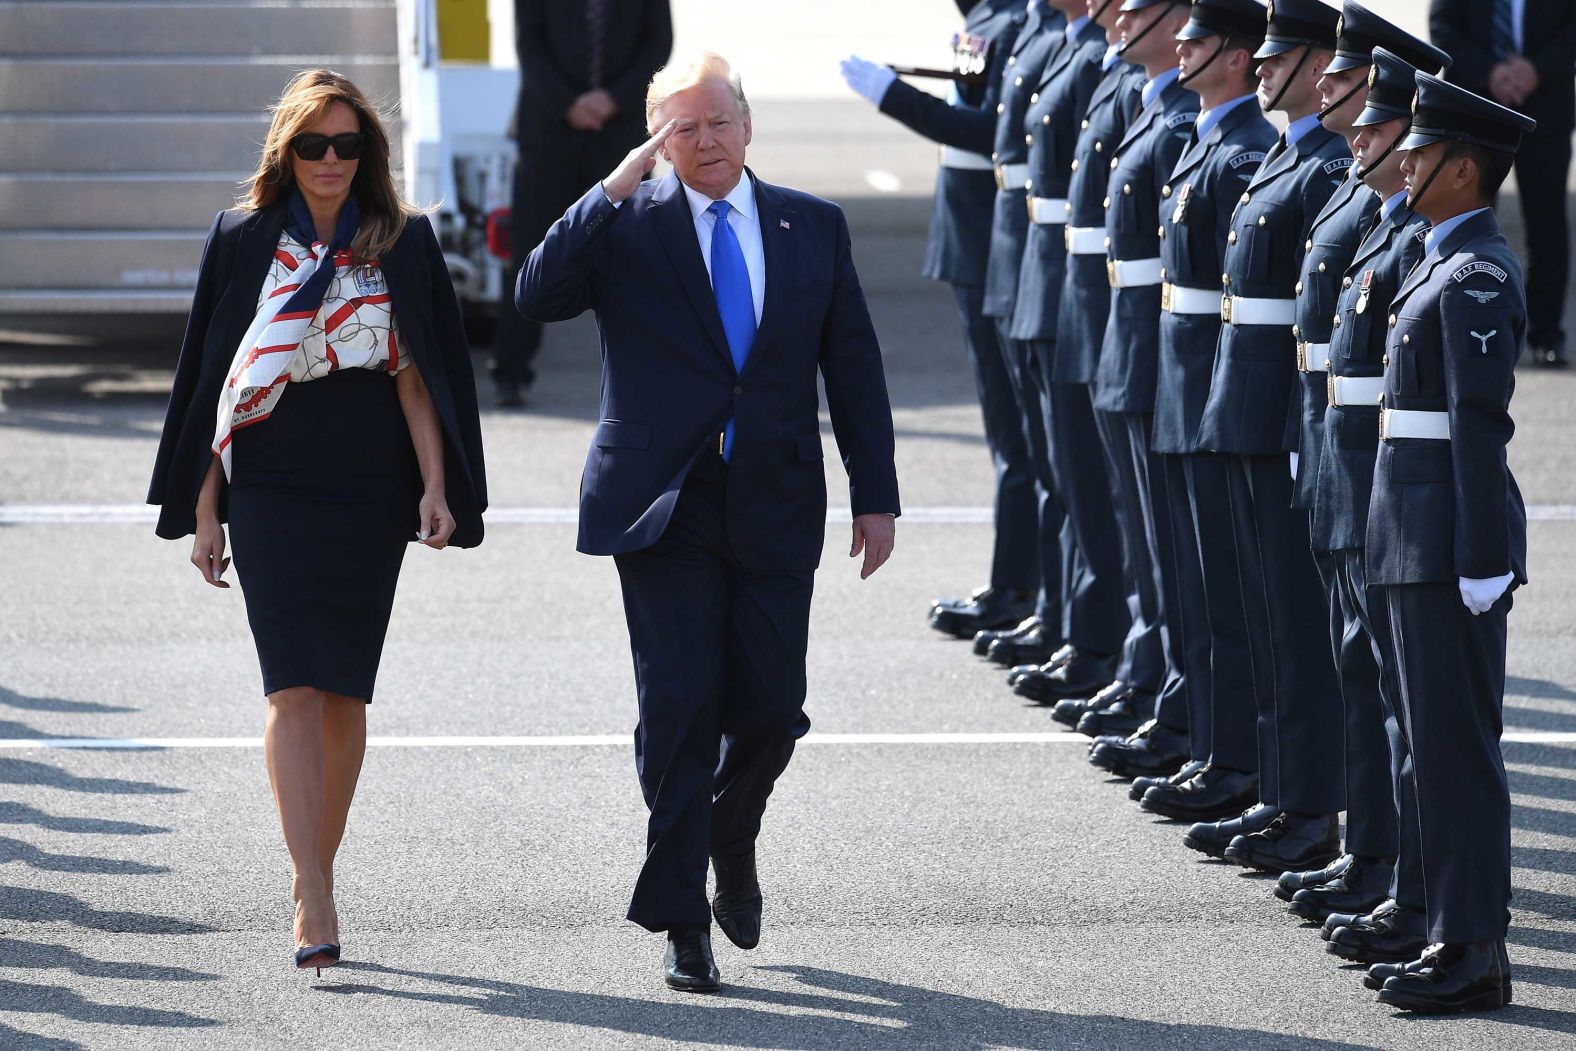 The President salutes troops as he and the first lady arrive at Stansted Airport.